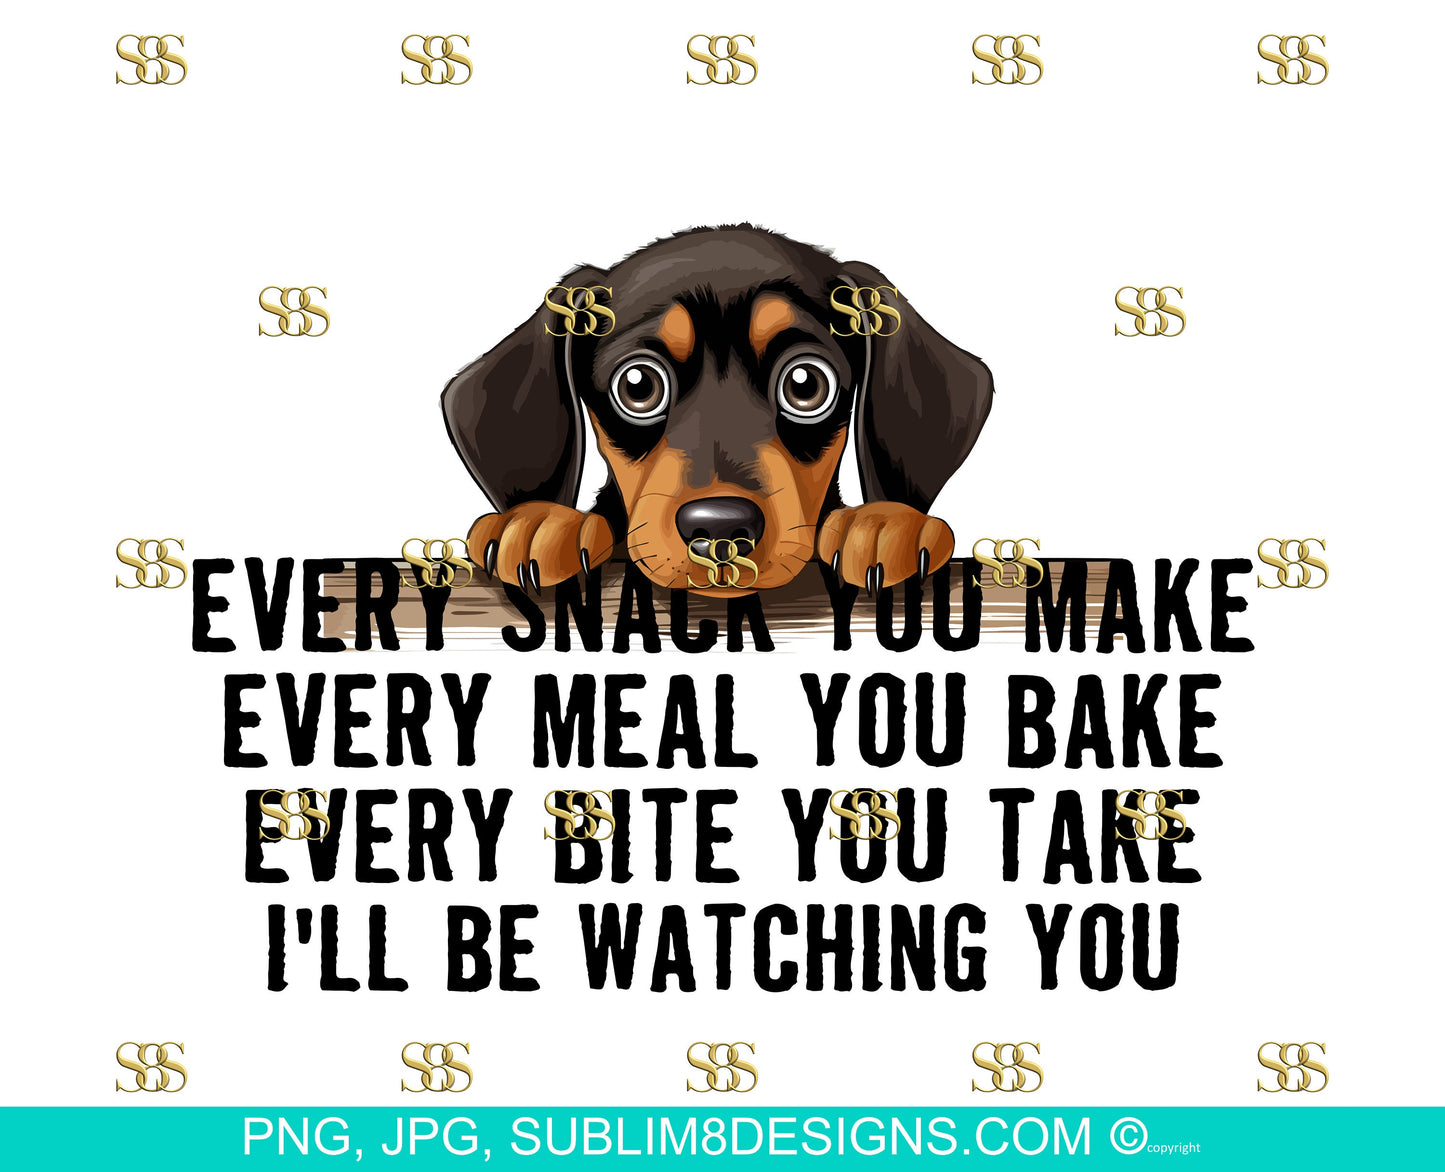 Snack-Obsessed Dachshund: The Hilarious Table Peeker! Every Bite You Take I'll Be Watching You PNG and JPEG ONLY